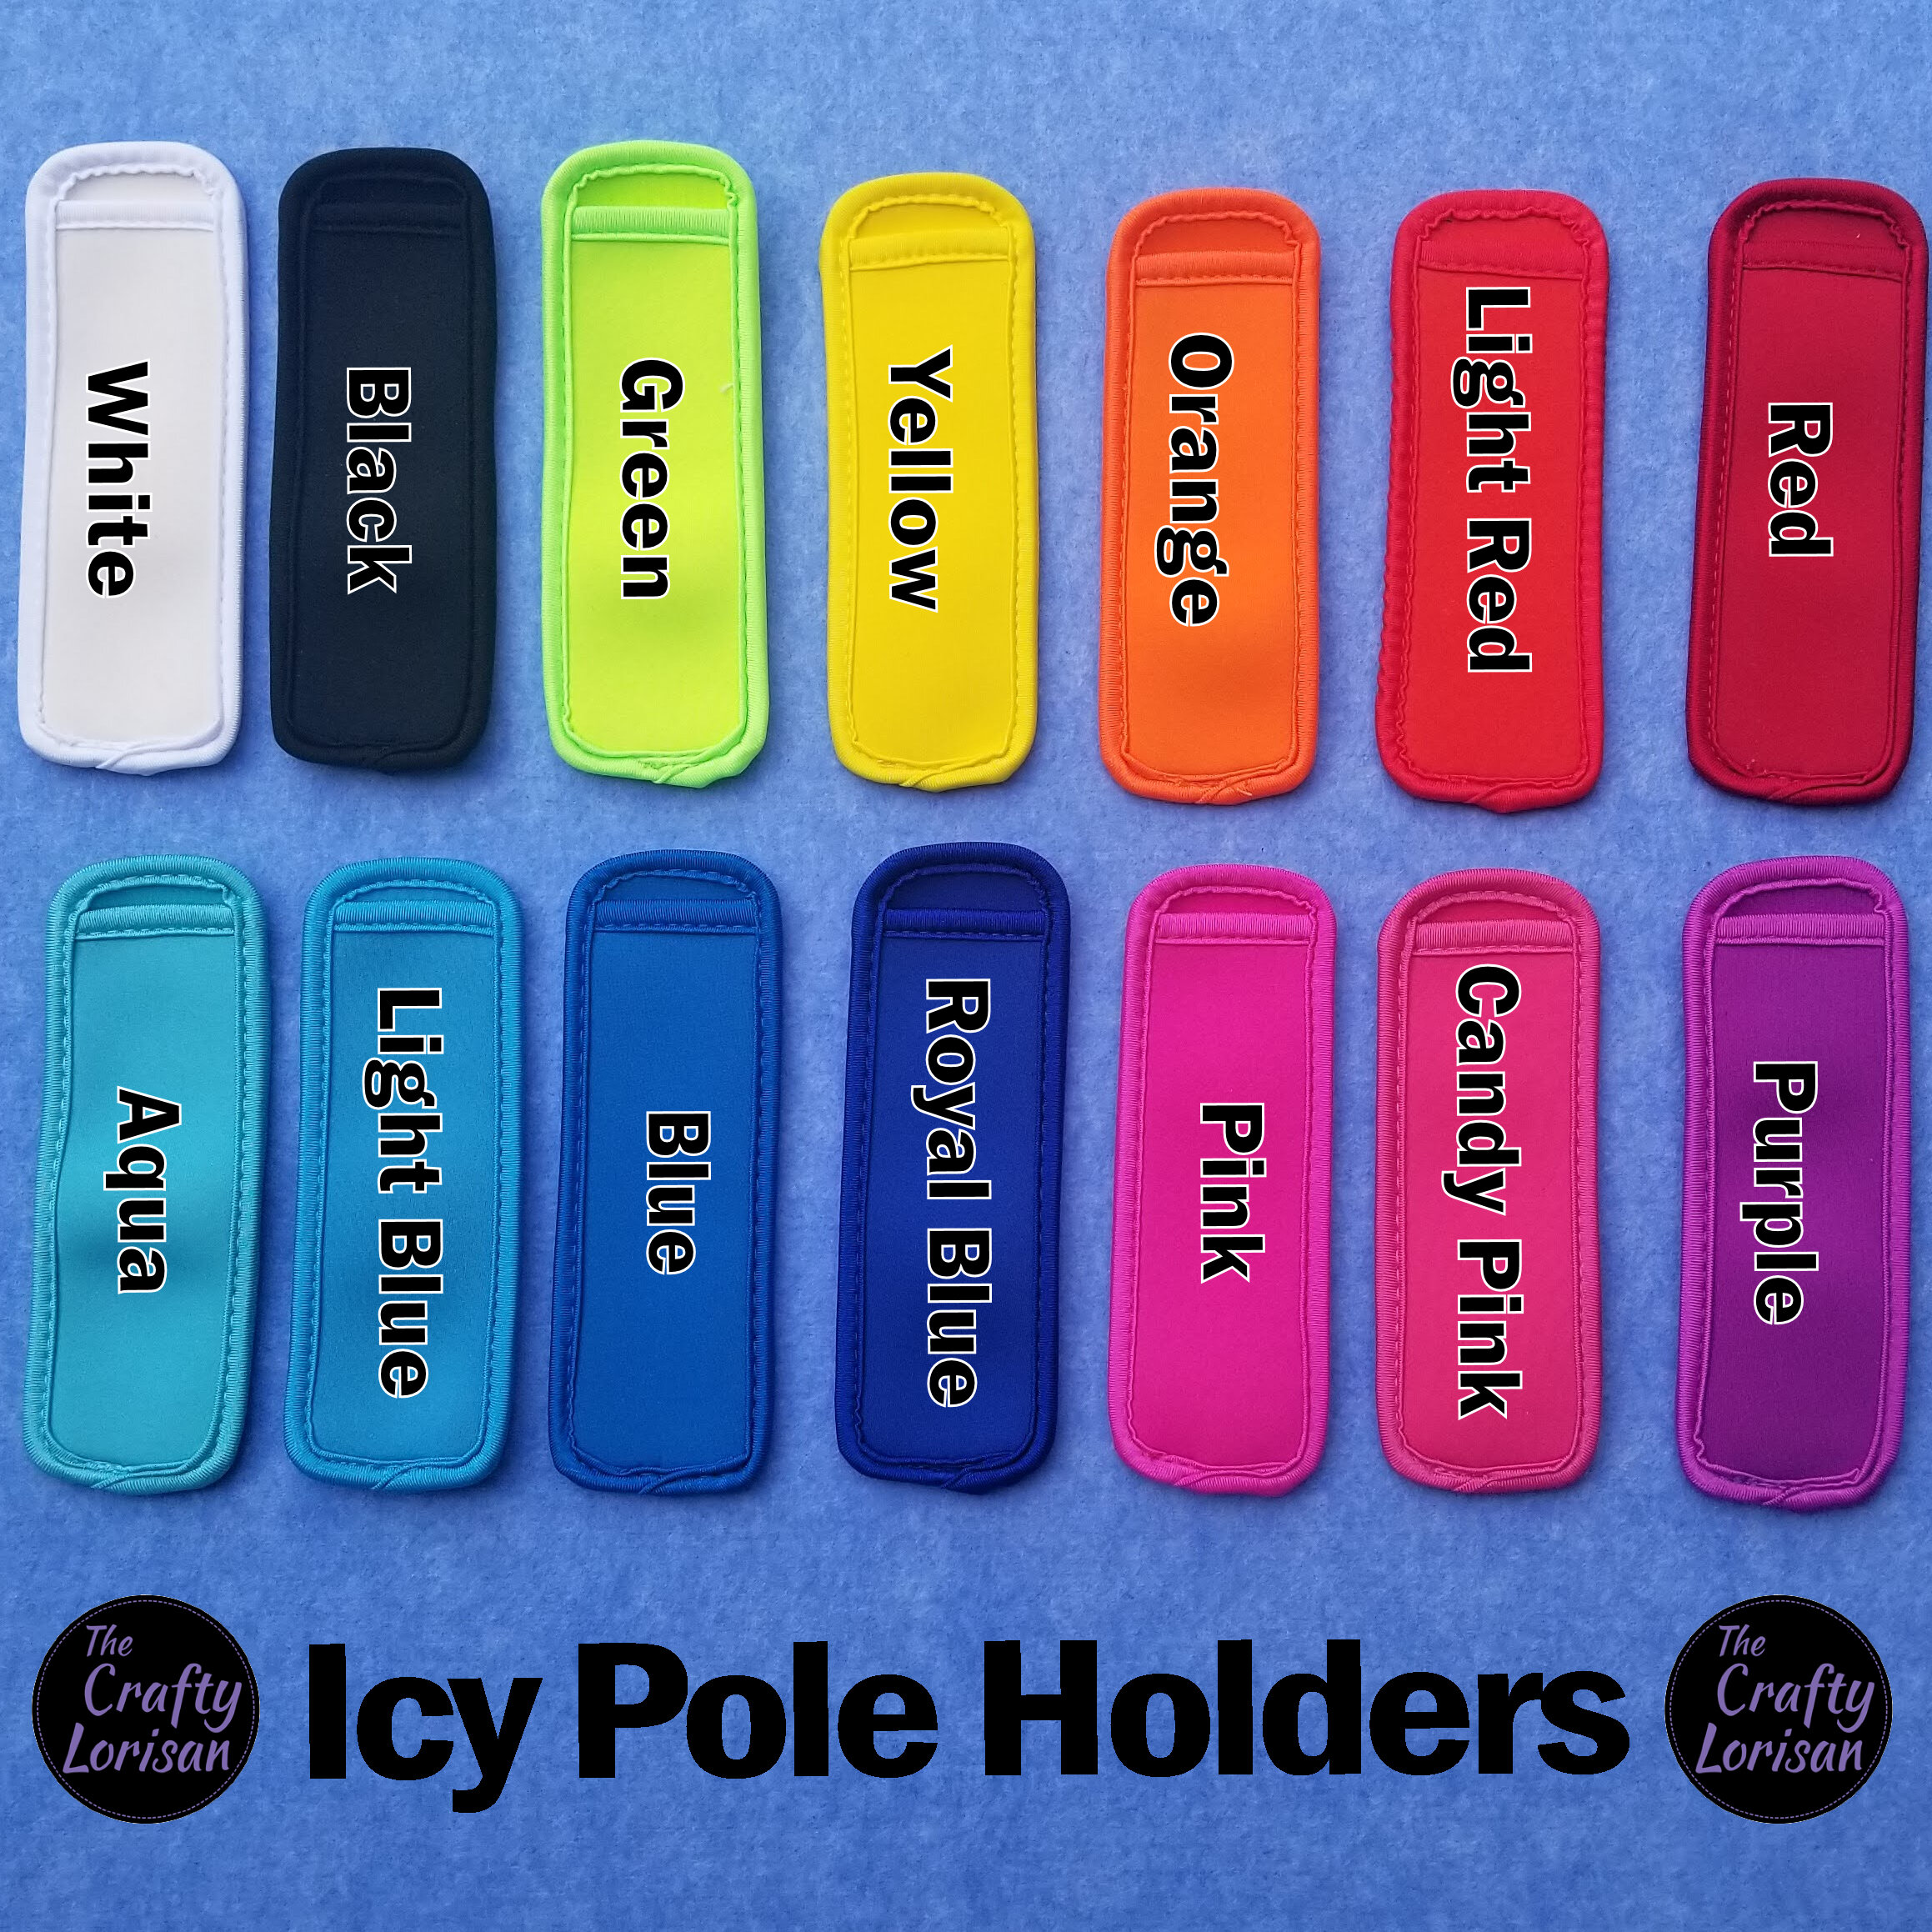 Icy pole holders with names final.jpg